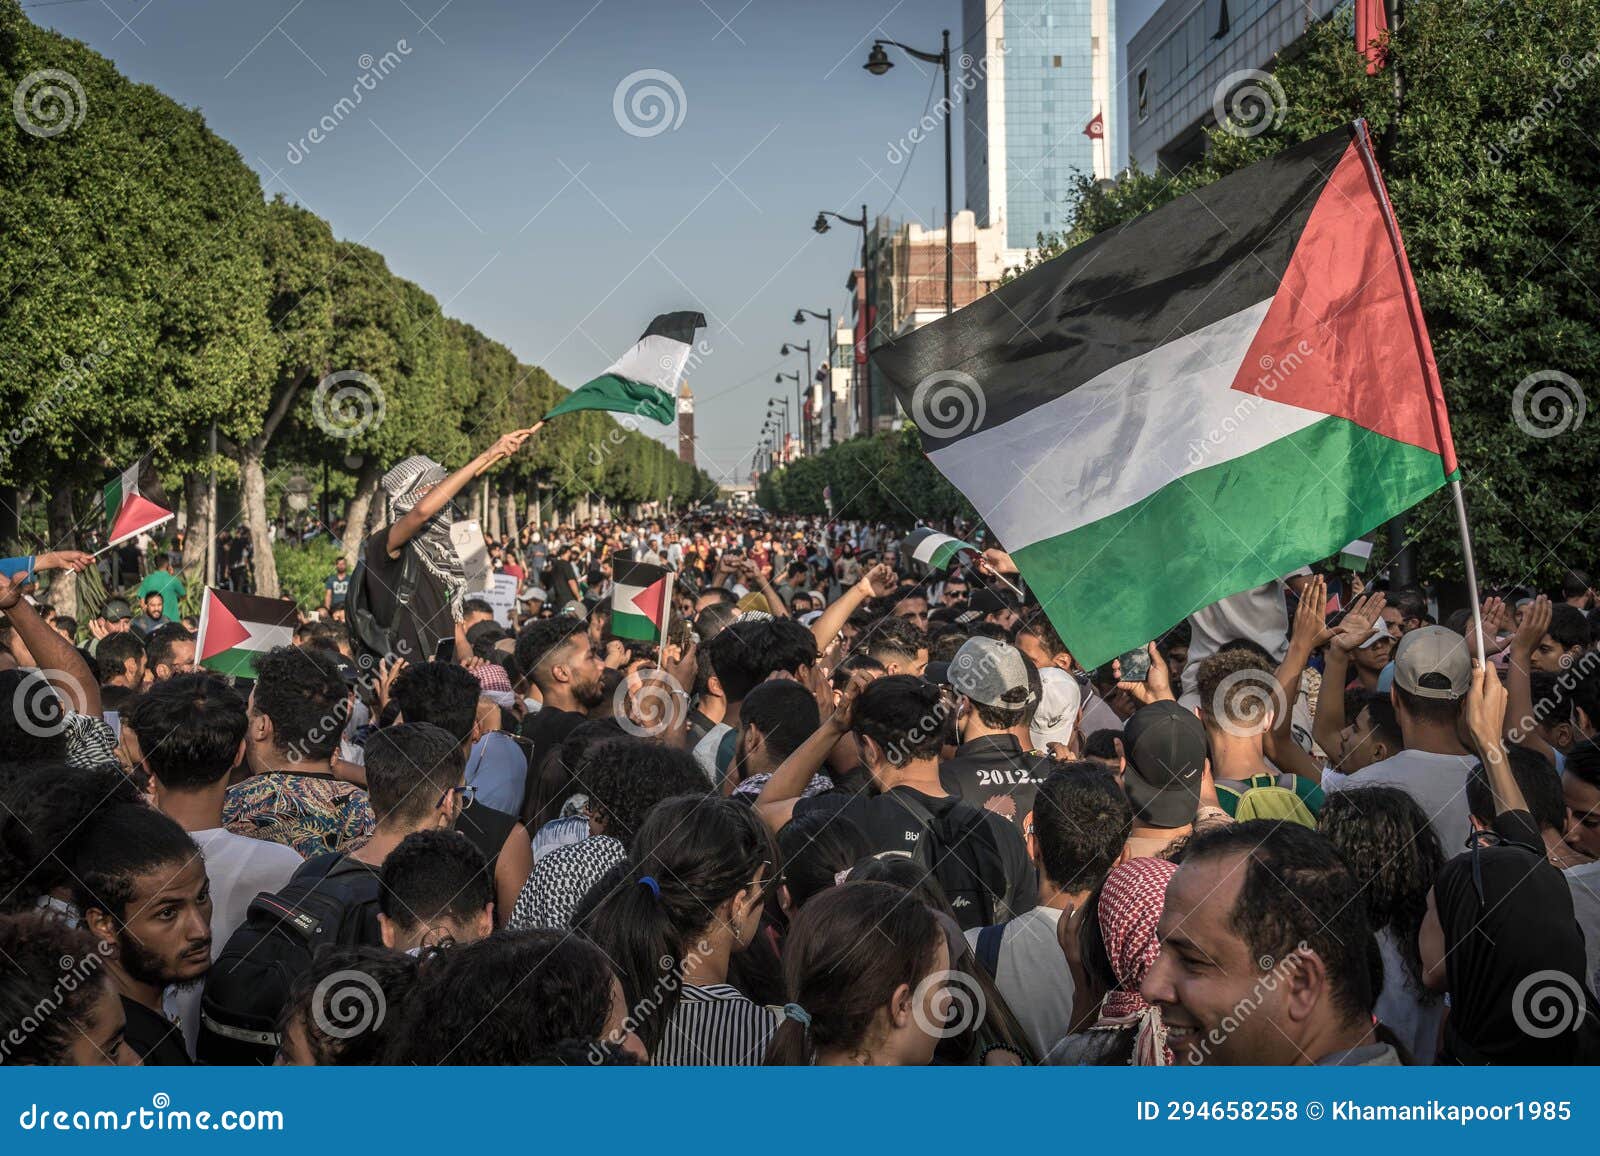 The Crowd of Protesters with Palestinian Flags and Keffiyehs at the Pro ...